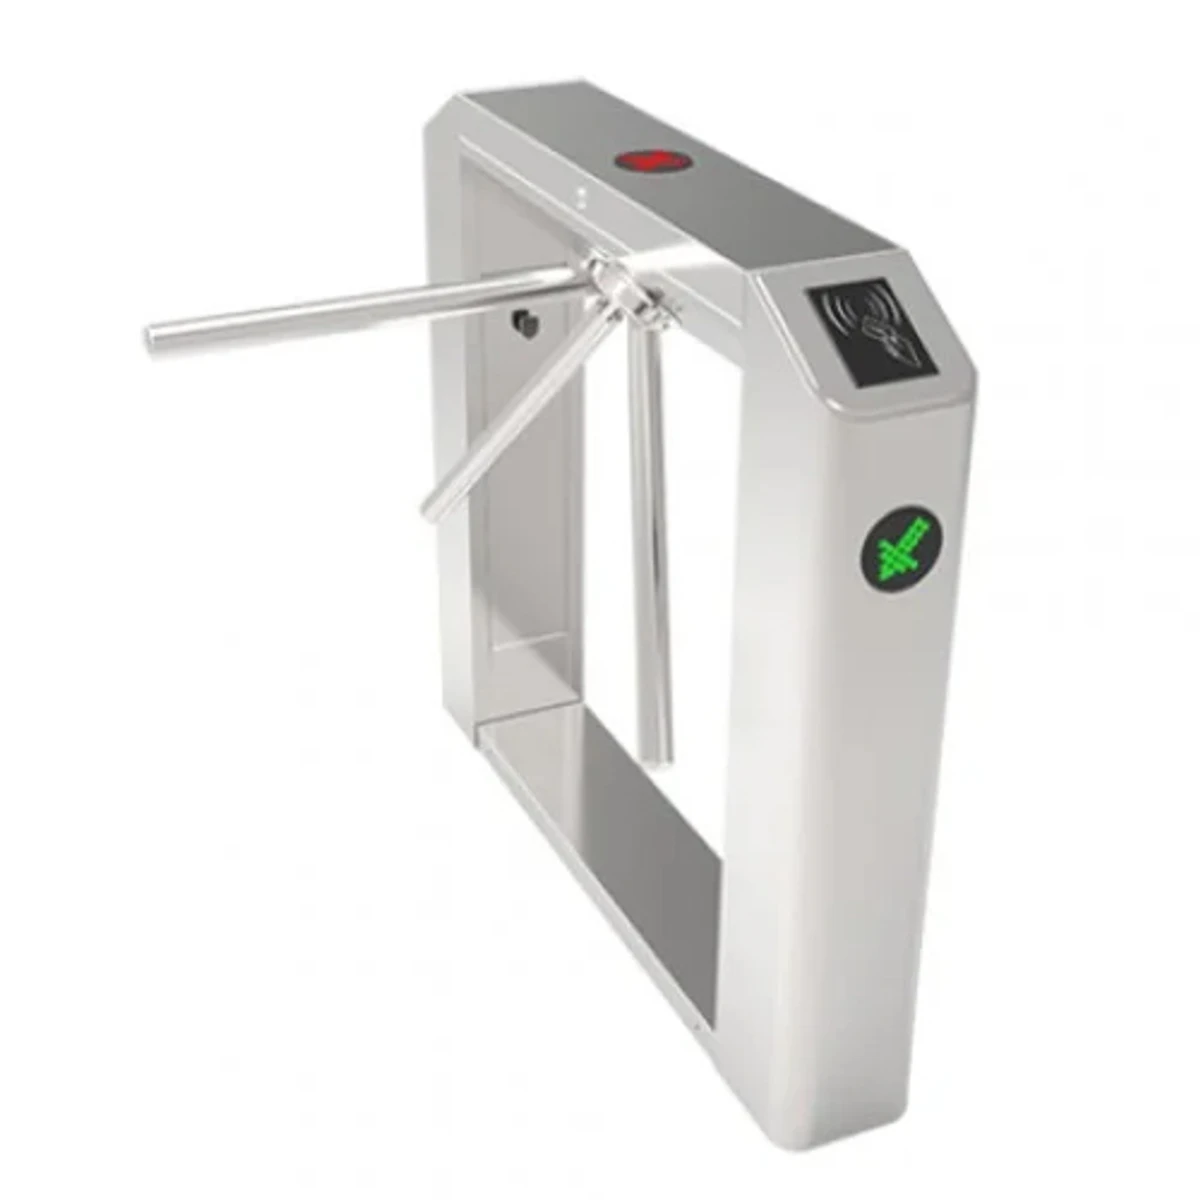 ZKTeco TS2011 Tripod Turnstile With Controller And RFID Reader